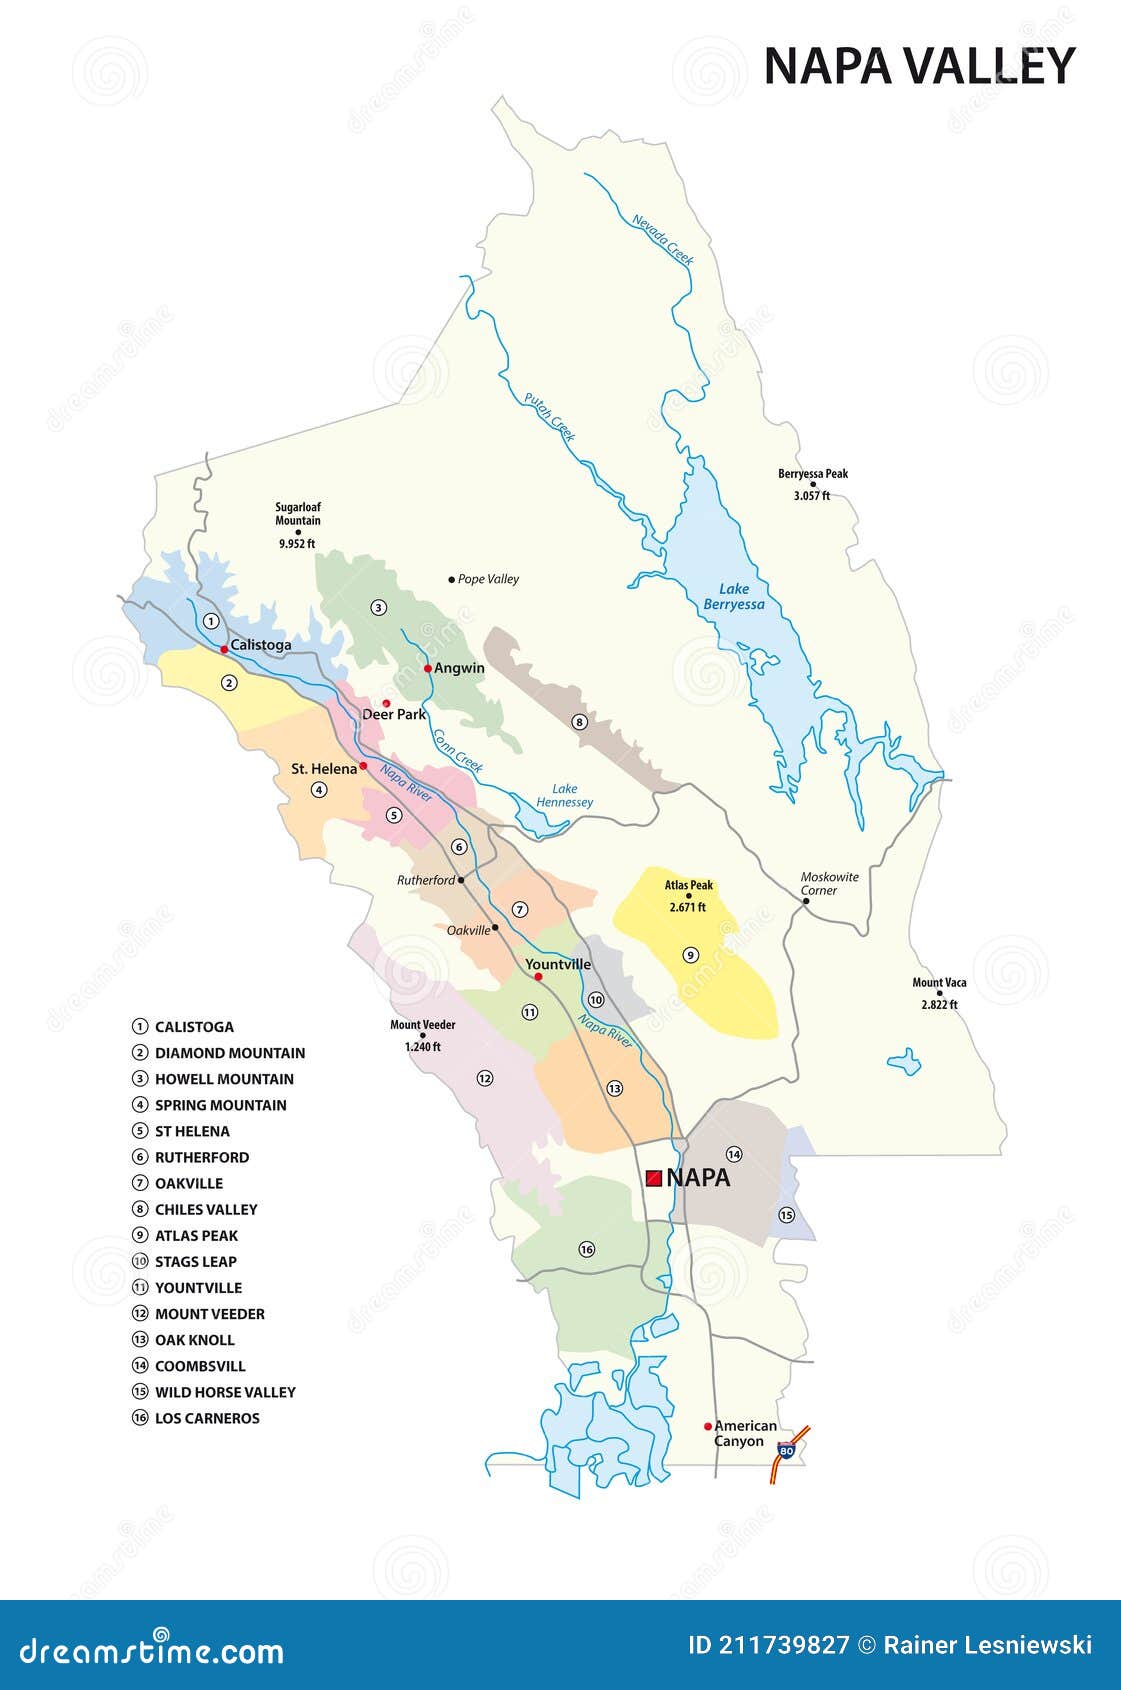  map of wine growing regions in californias napa valley district, united states